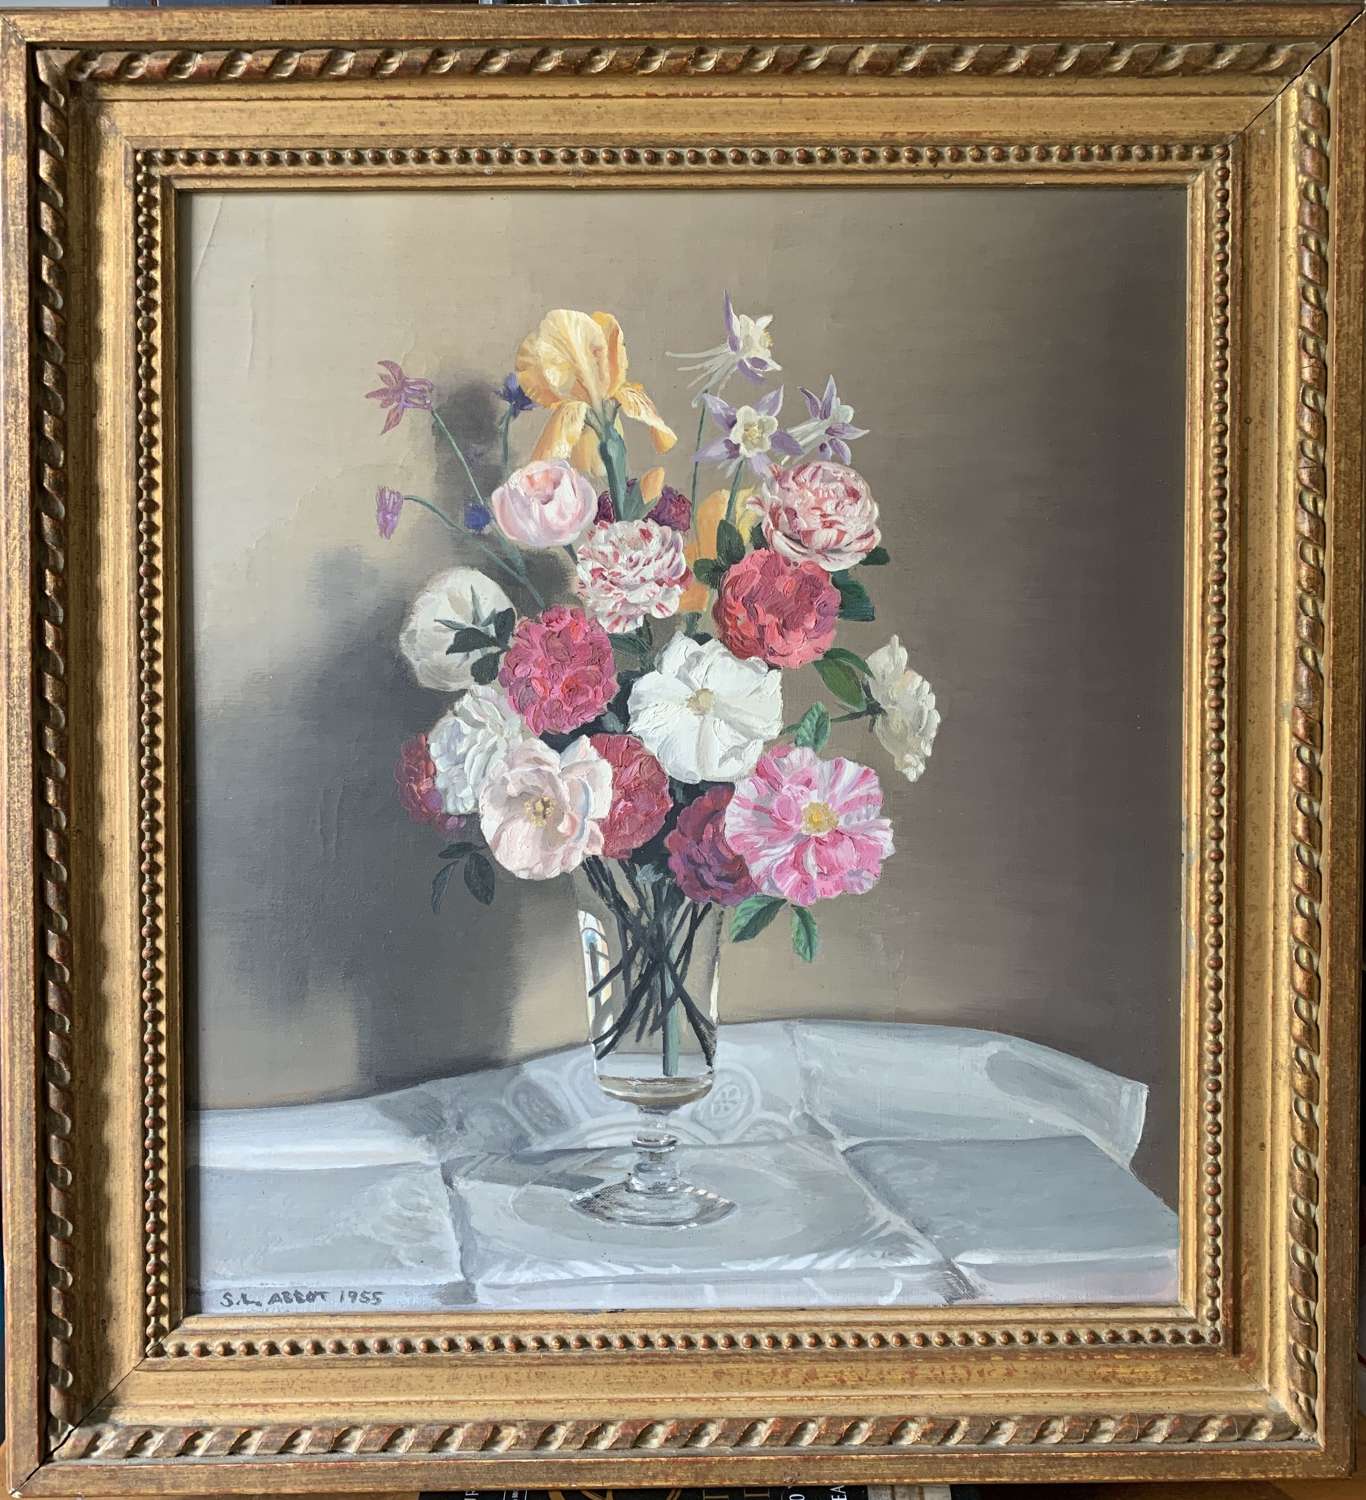 S.L. Abbot, Still Life of Flowers in a Glass, Oil on Canvas